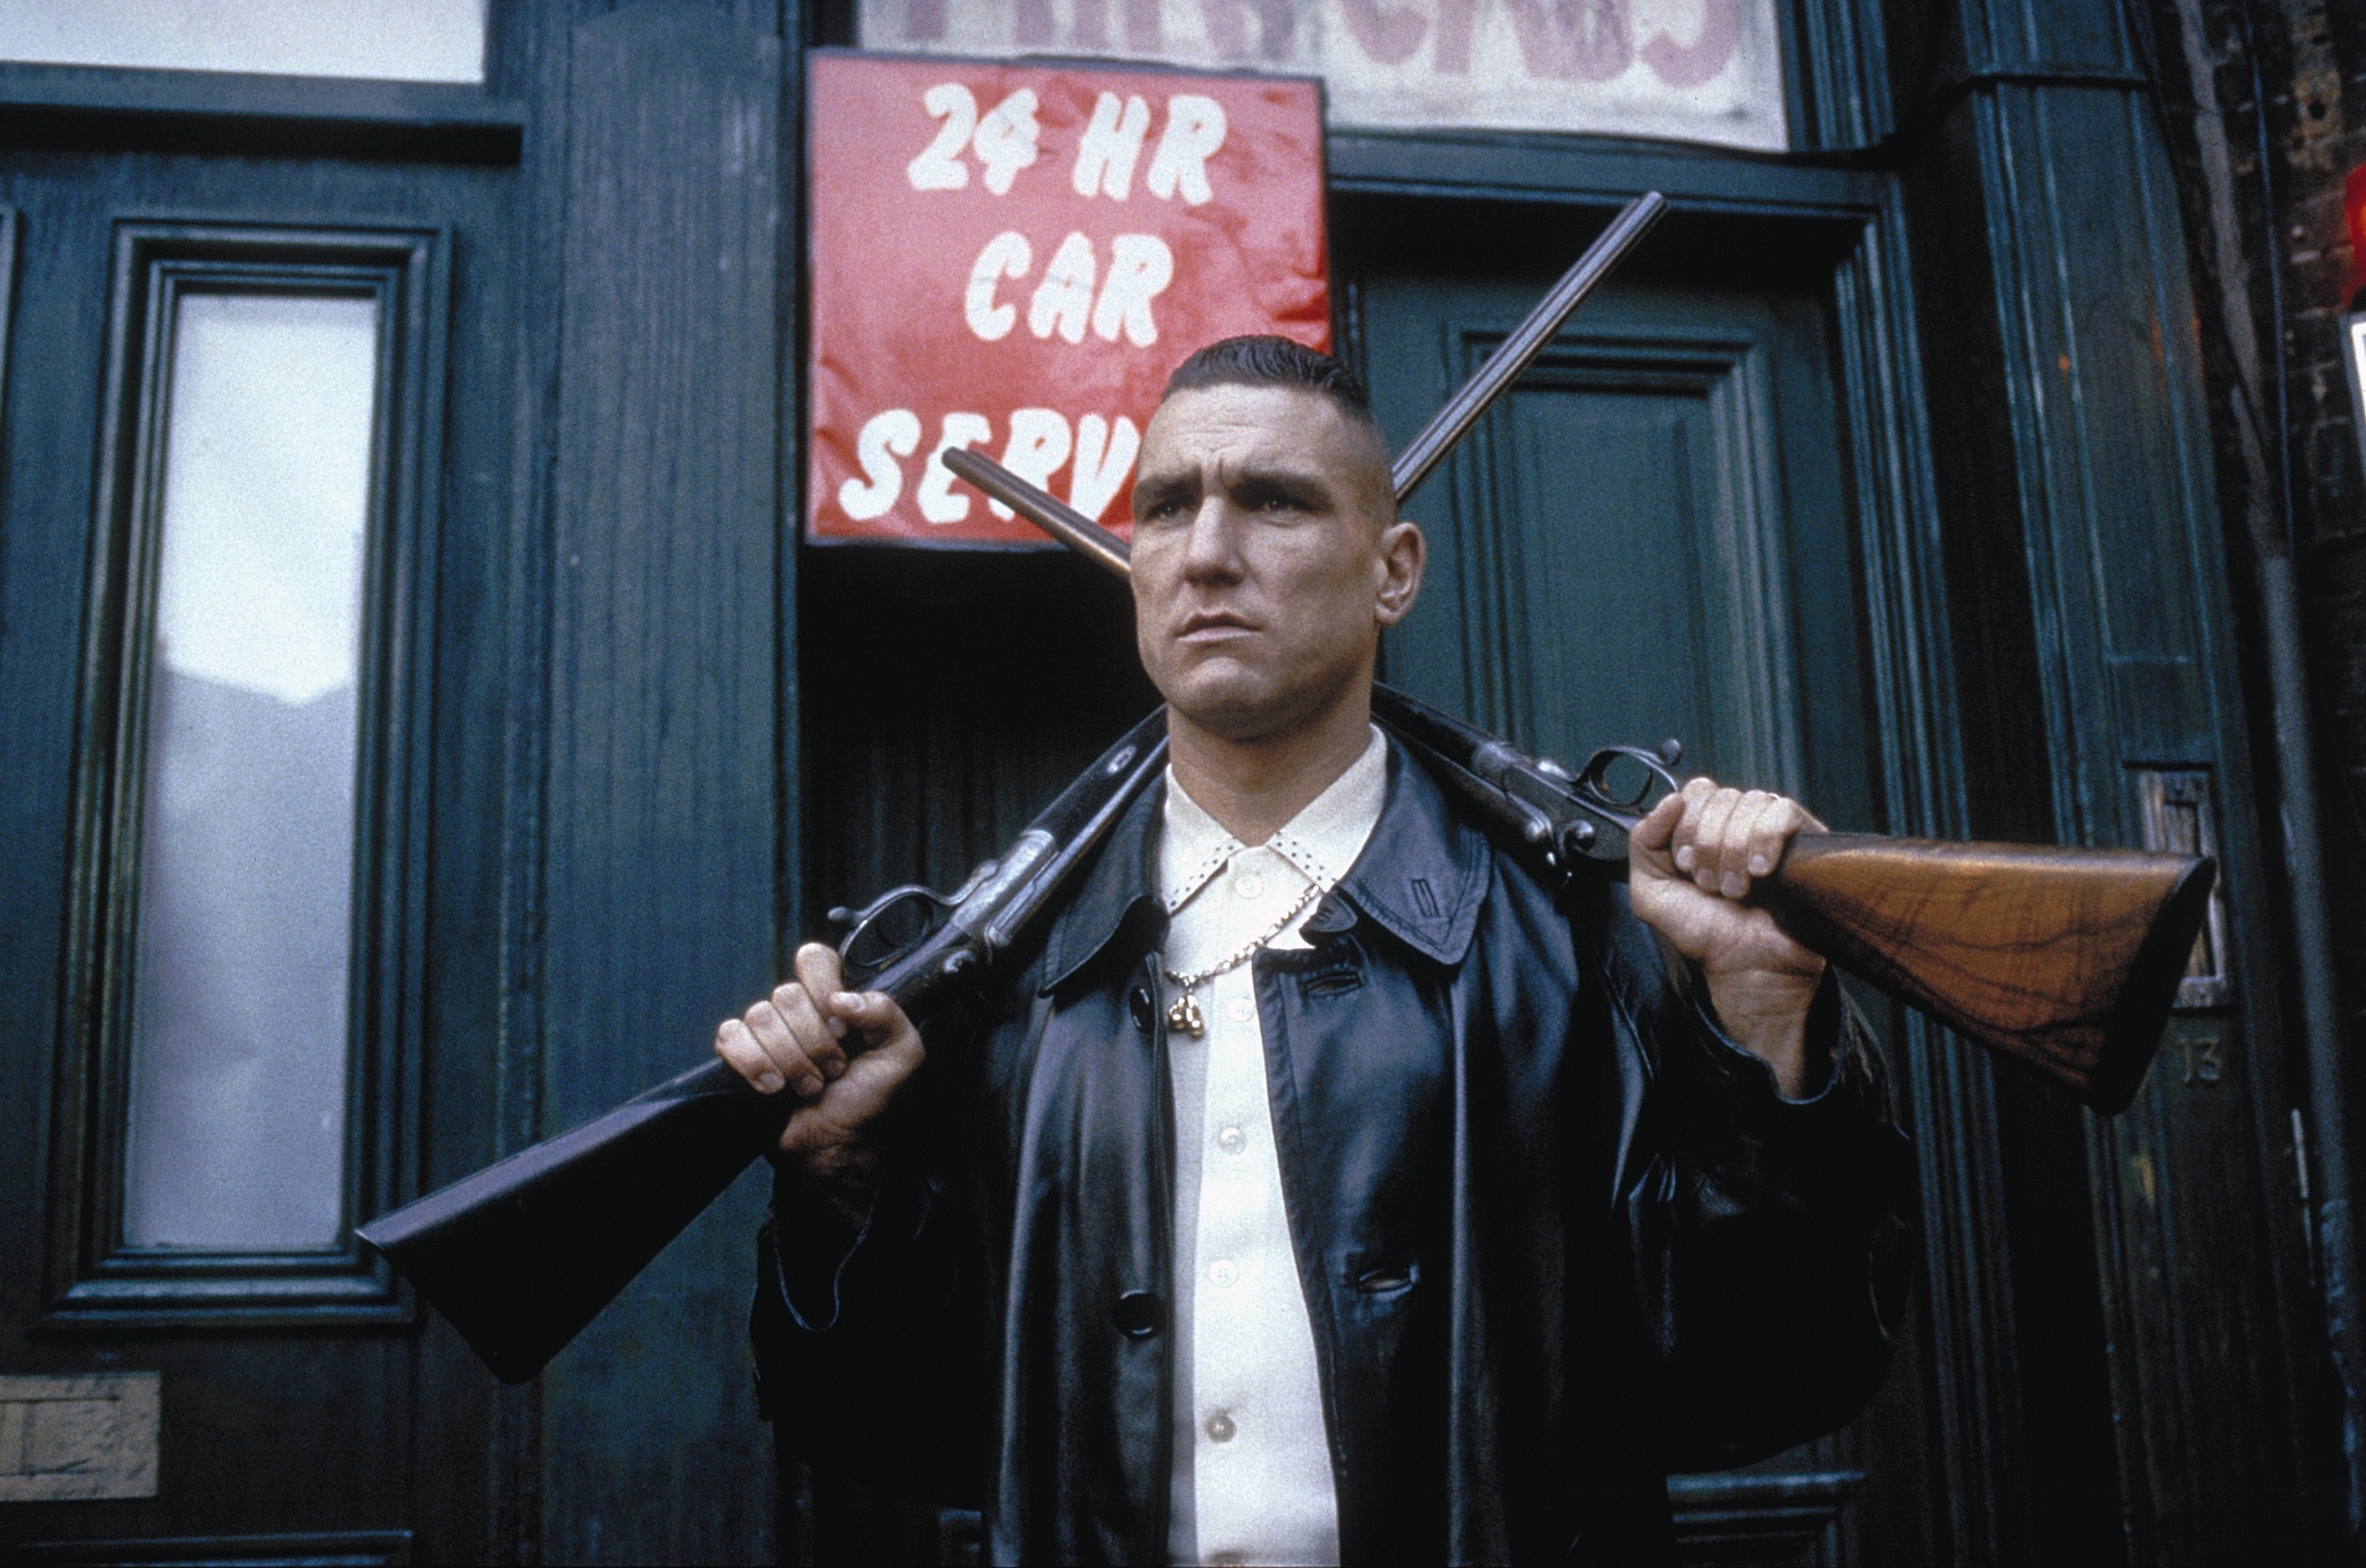 <p>Guy Richie loves himself a London crime movie. He made his name with <em>Lock, Stock, and Two Smoking Barrels</em>. It’s a street-level crime comedy about a couple of small-time crooks, but it’s a solid film that introduced some future stars to the masses.</p><p>You may also like: <a href='https://www.yardbarker.com/entertainment/articles/20_facts_you_might_not_know_about_gladiator/s1__35259995'>20 facts you might not know about 'Gladiator'</a></p>